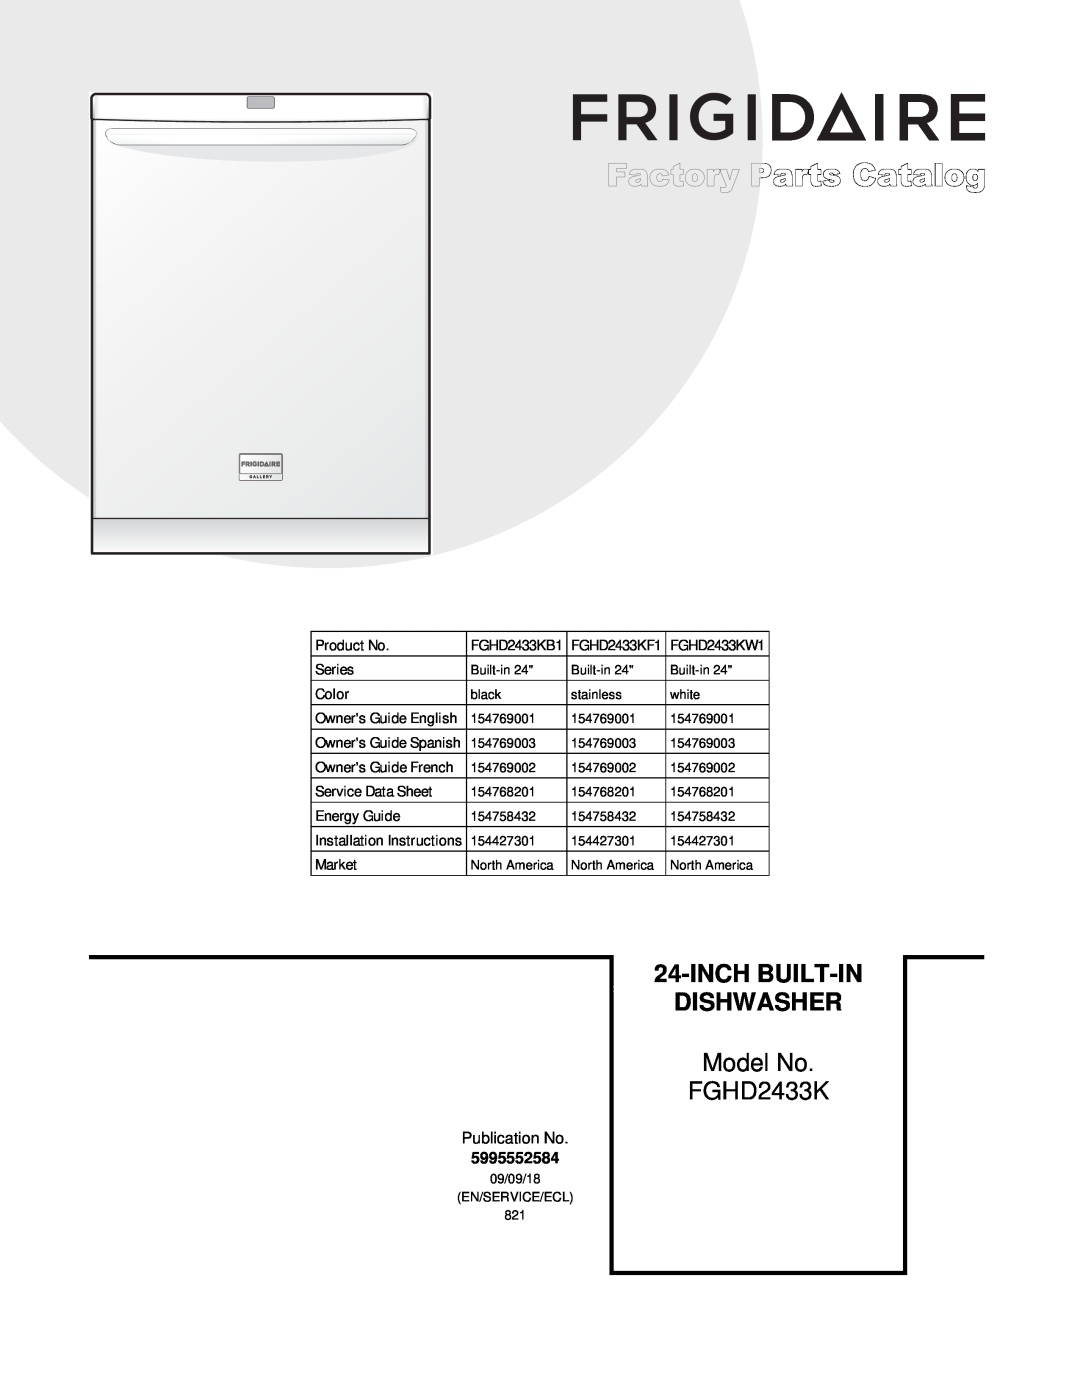 Frigidaire FGHD2433K installation instructions Product No, Series, Color, Service Data Sheet, Energy Guide, Market 